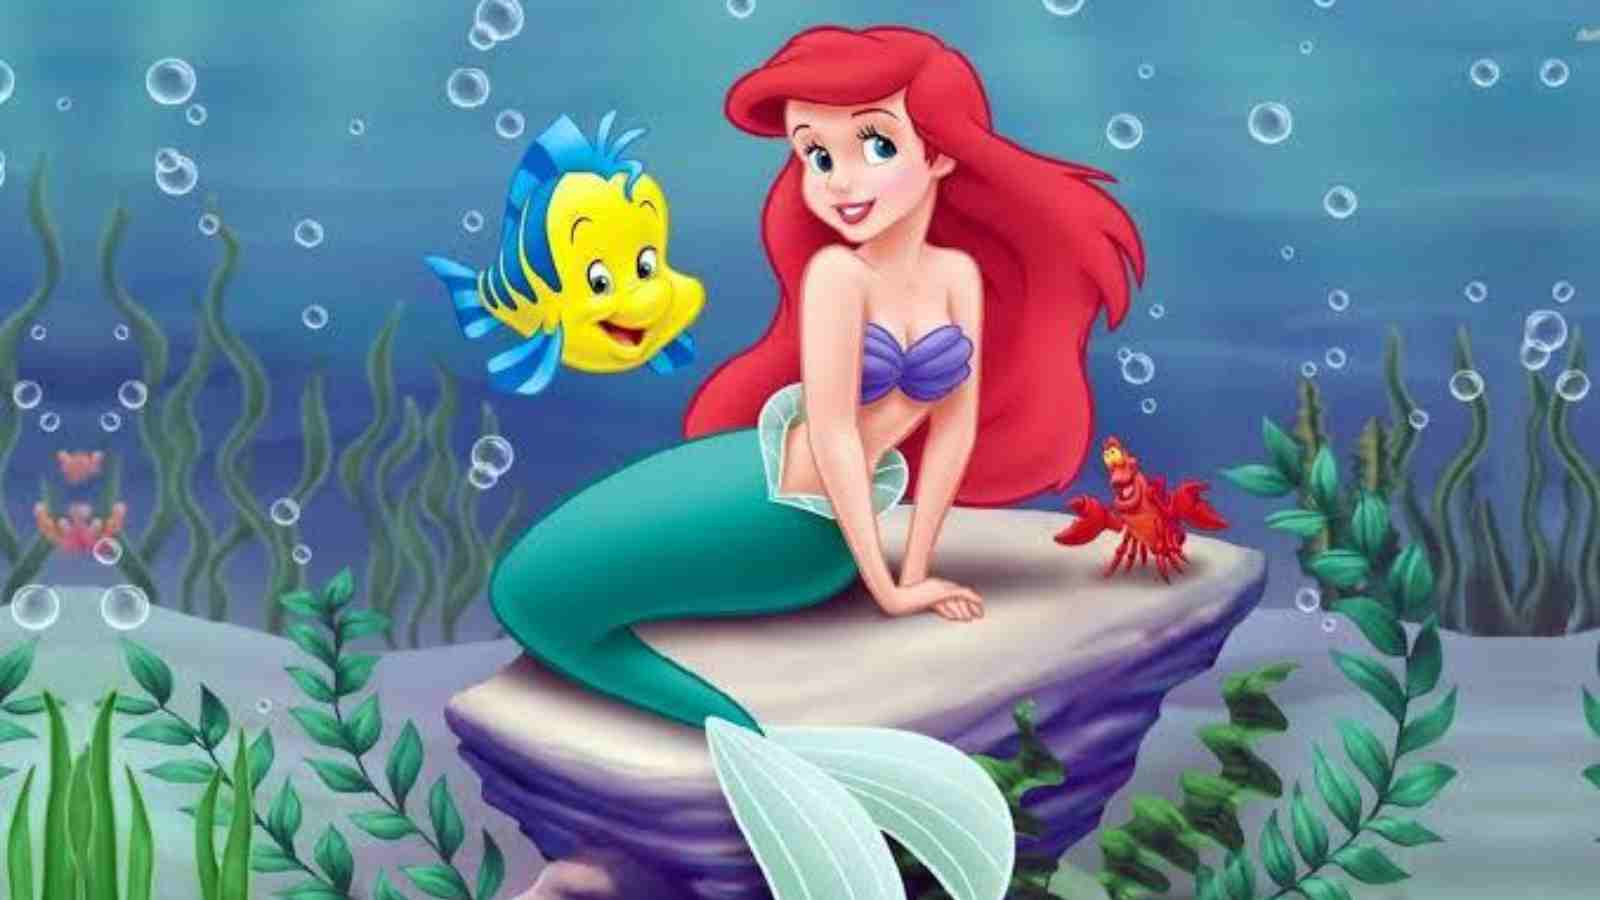 Disney is soon set to release The Little Mermaid as live-action 